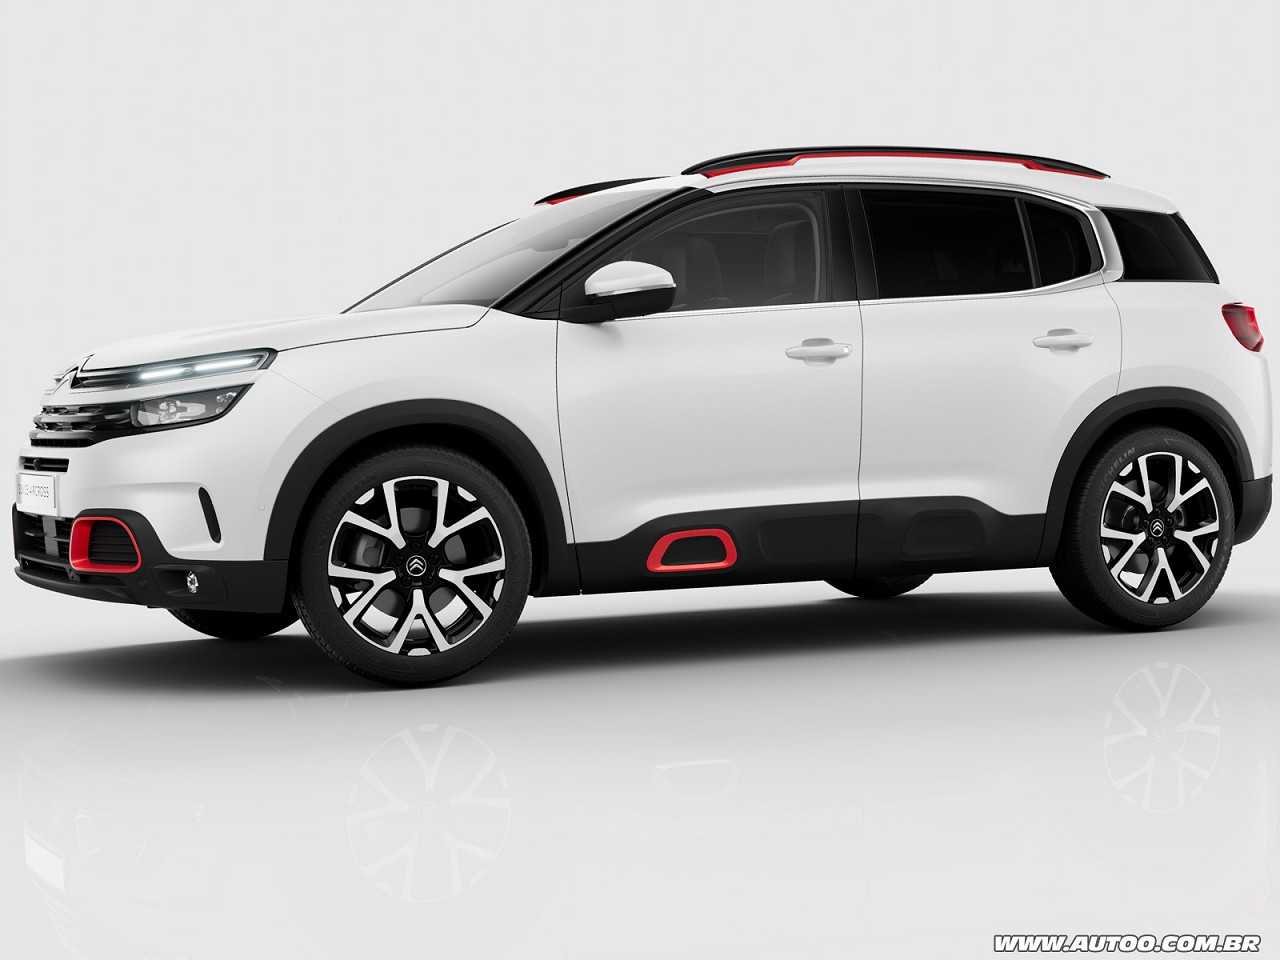 CitronC5 Aircross 2019 - lateral